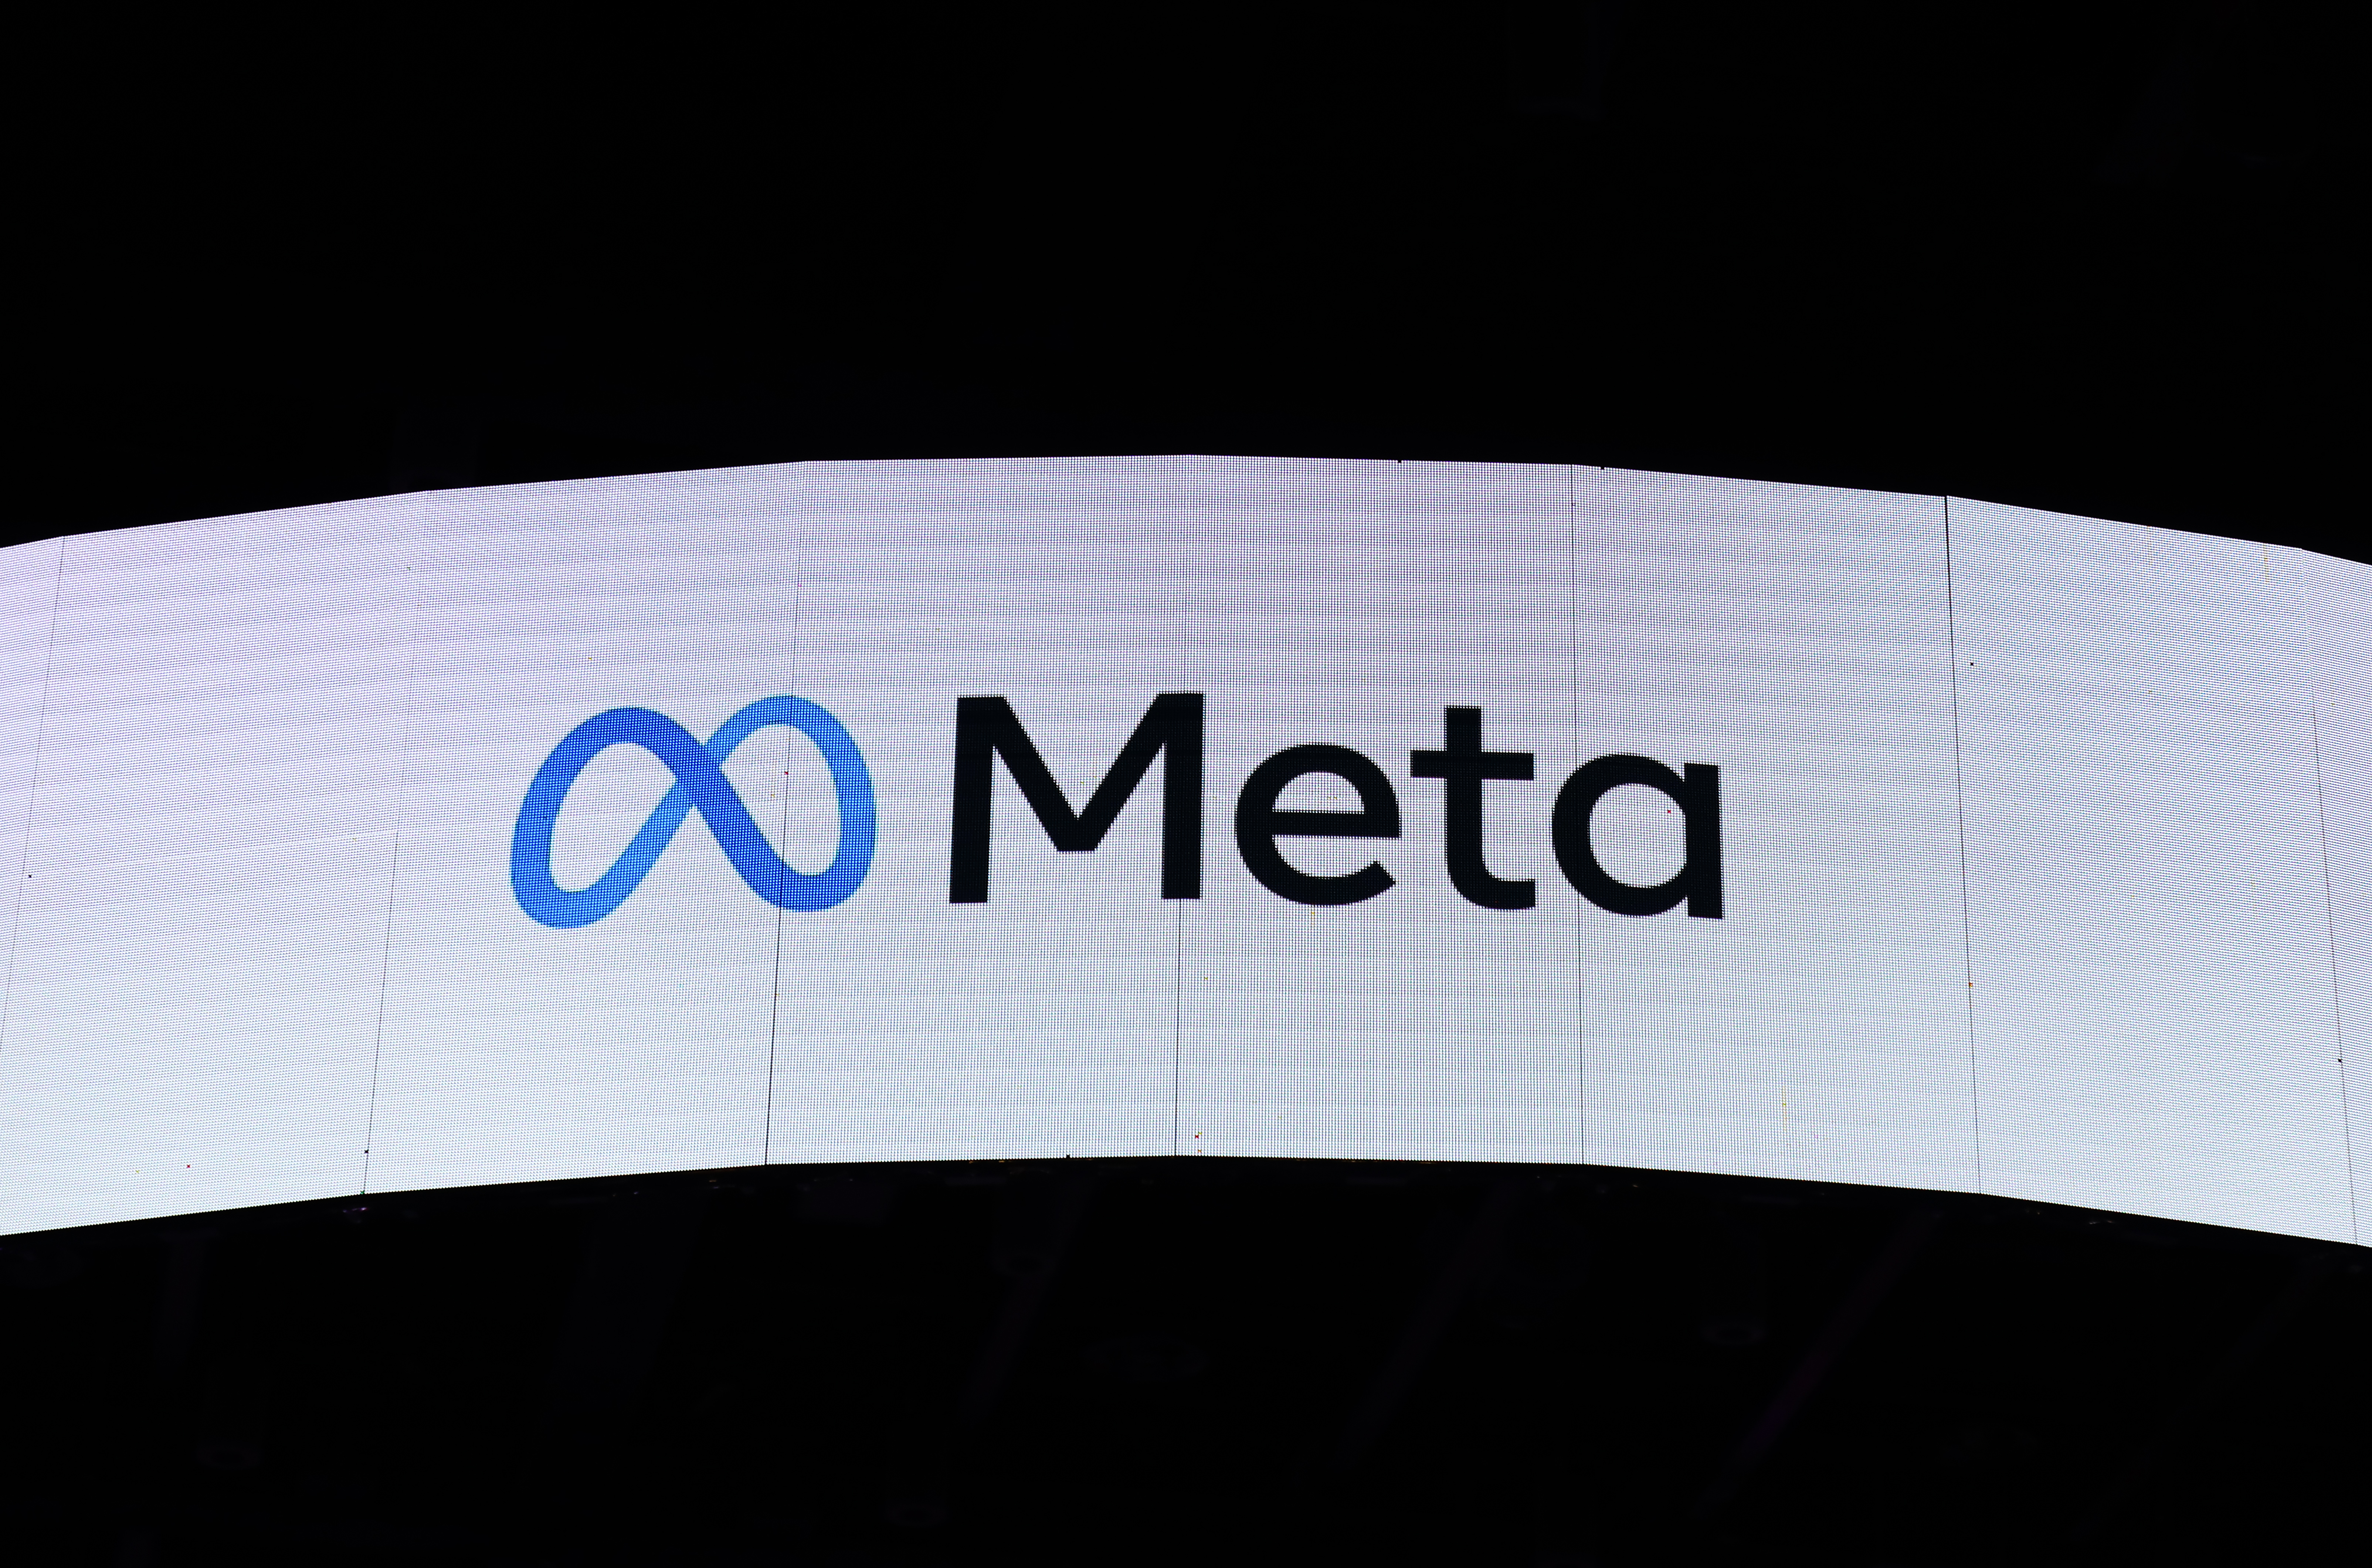 Meta Knowingly Designed Its Platforms to Hook Kids, Reports Say